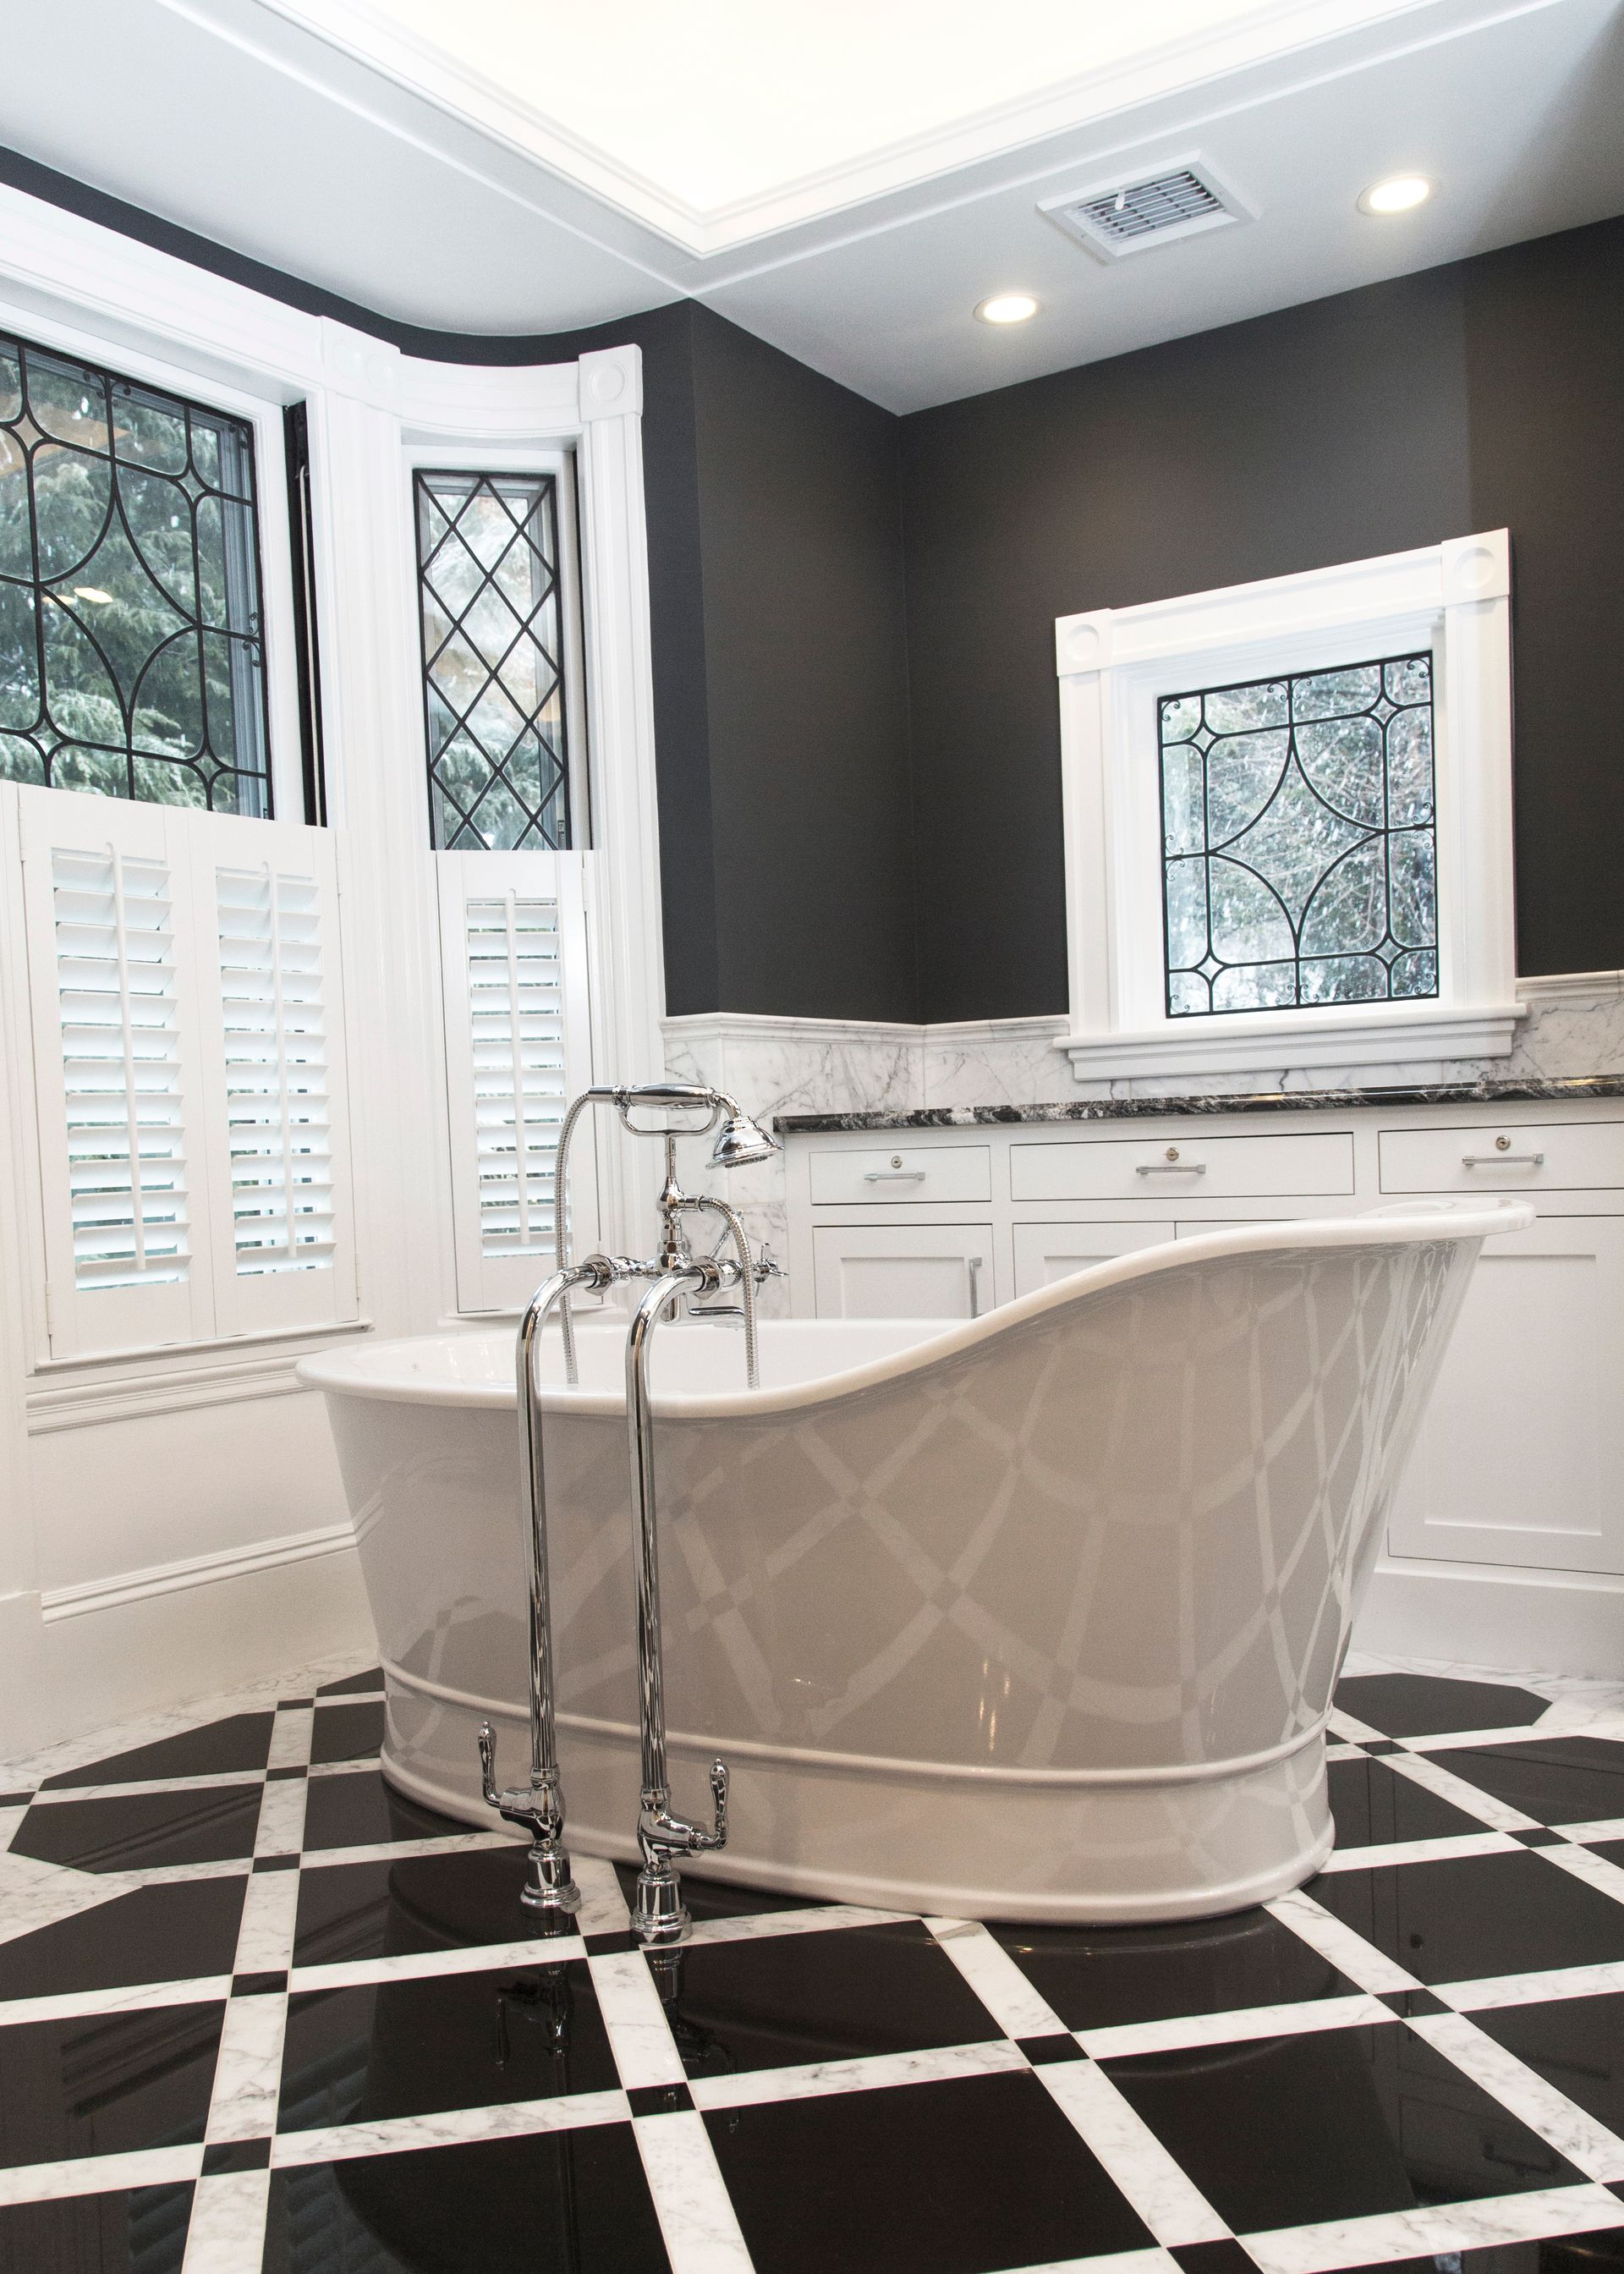 A bathroom with a black and white checkered floor and a bathtub.